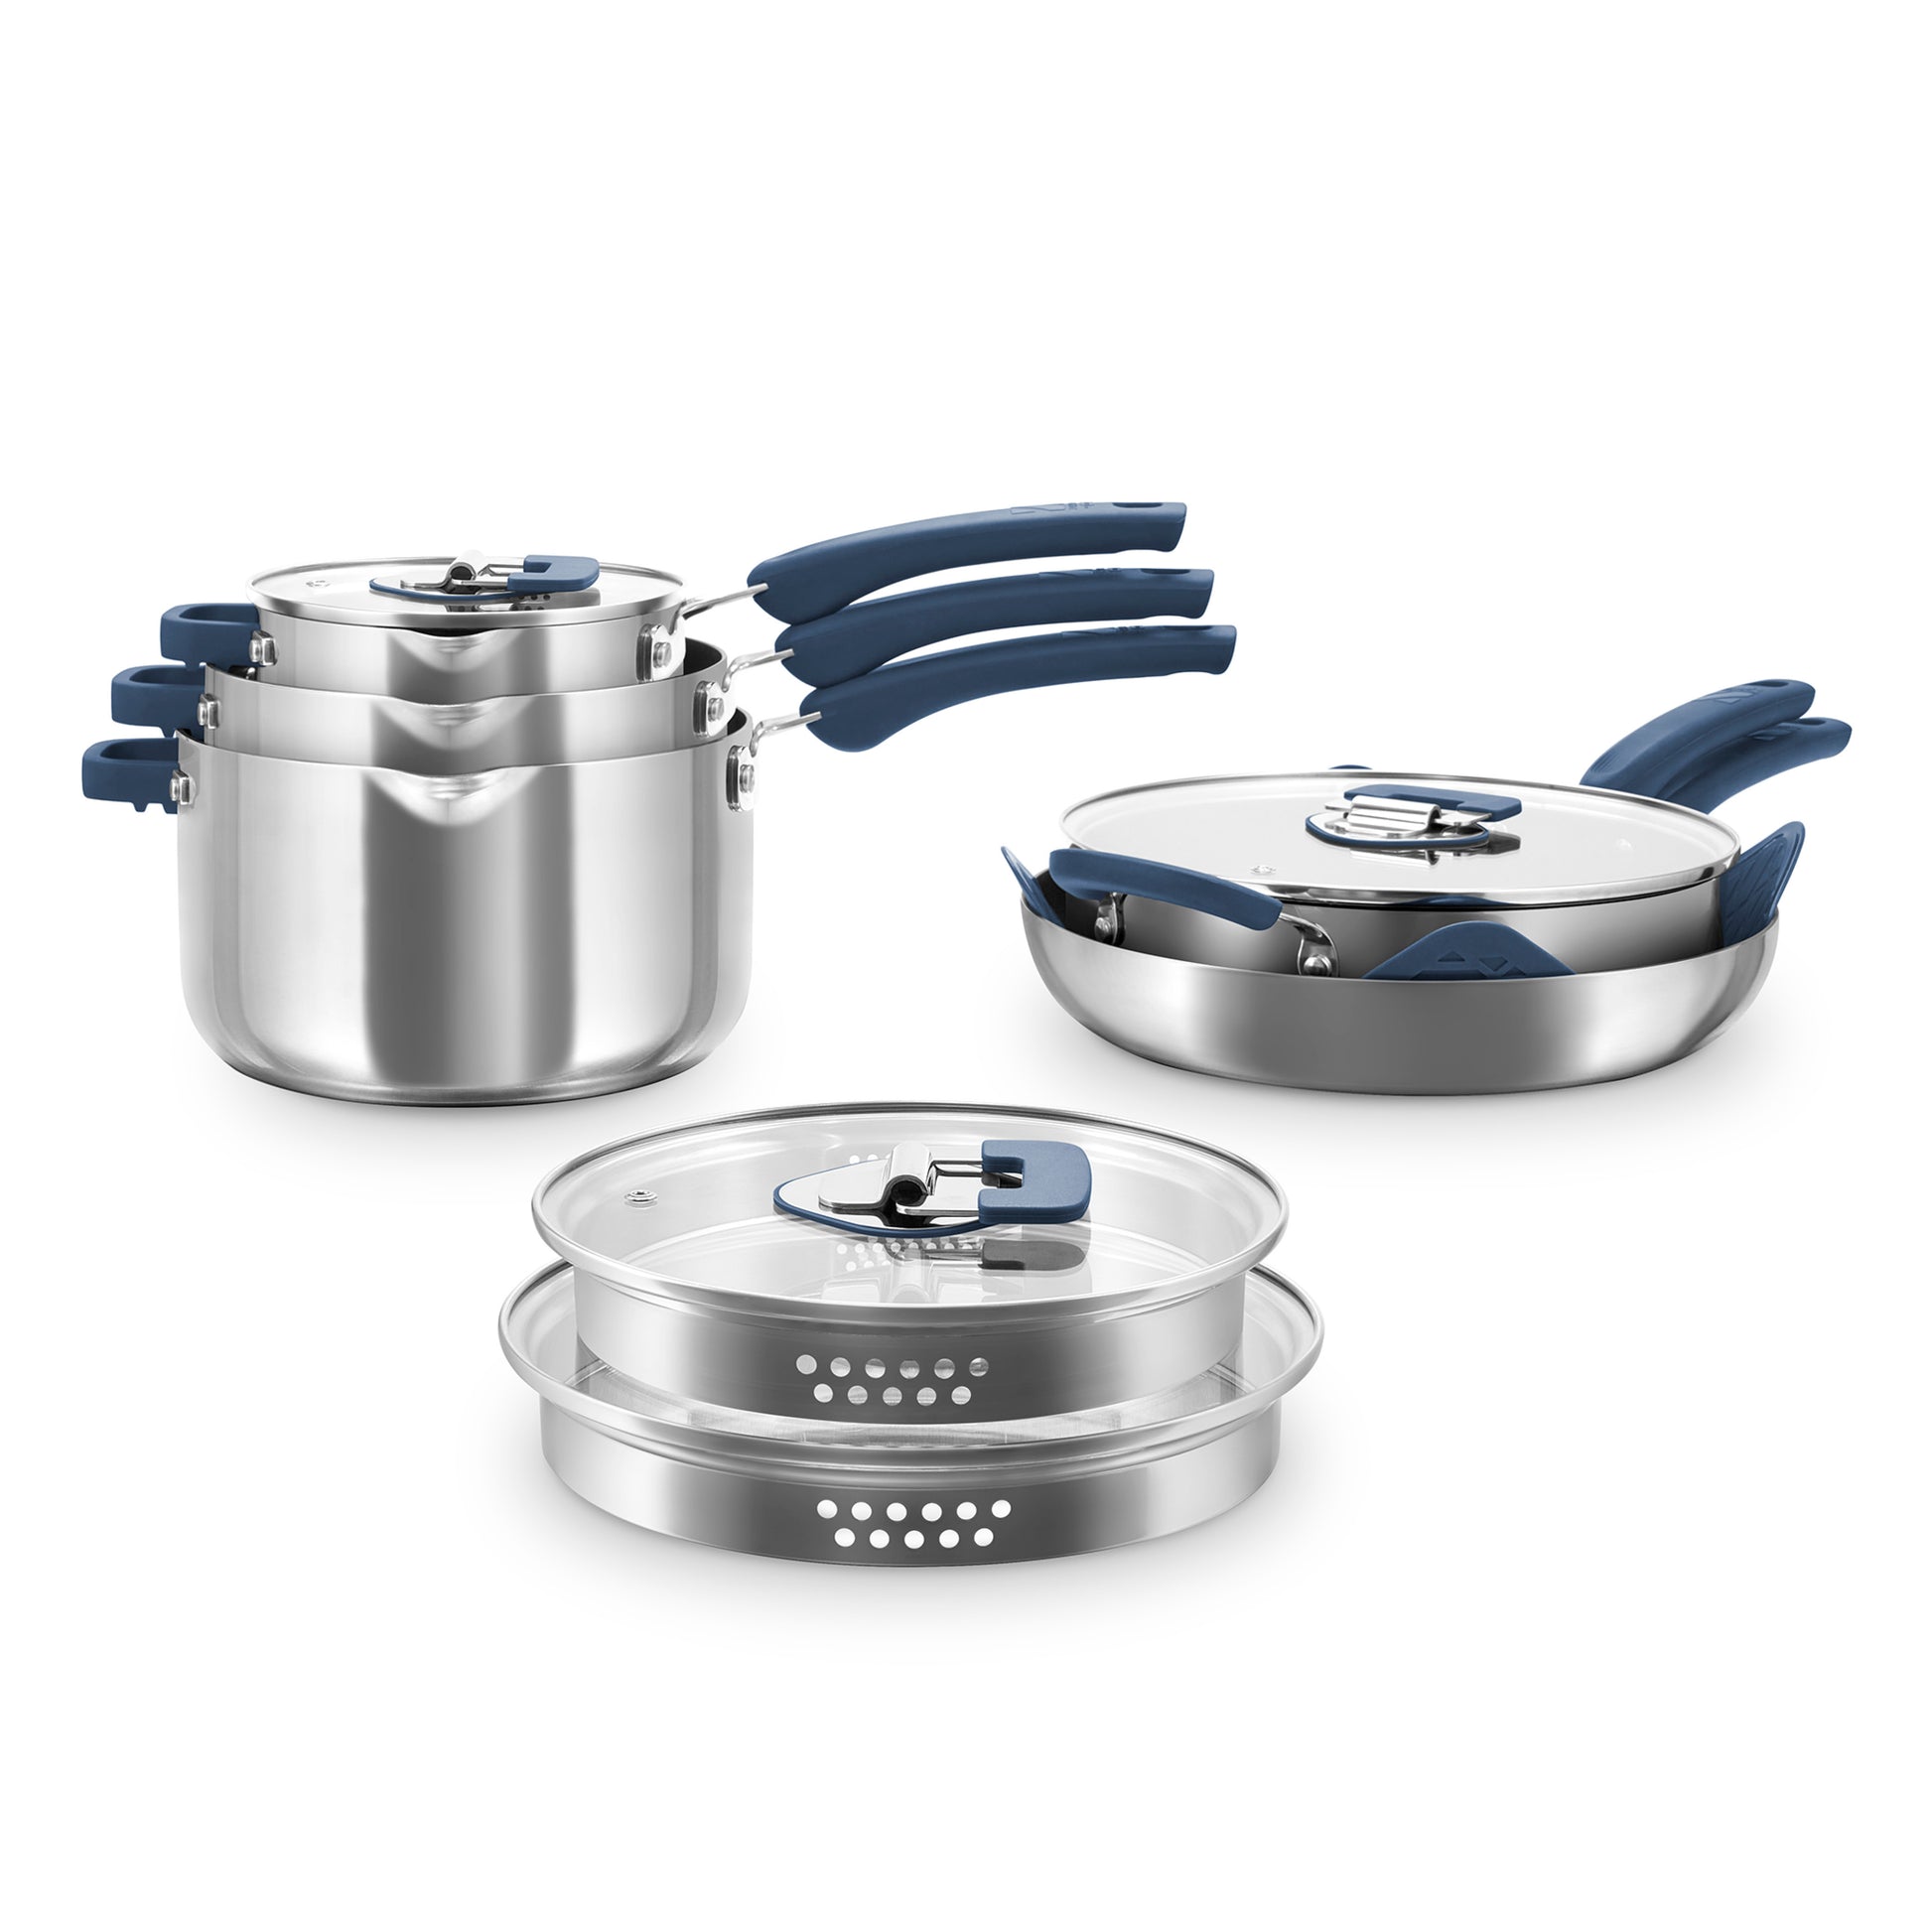 Zakarian by Dash Trupro 10PC Stainless Steel Cookware Set